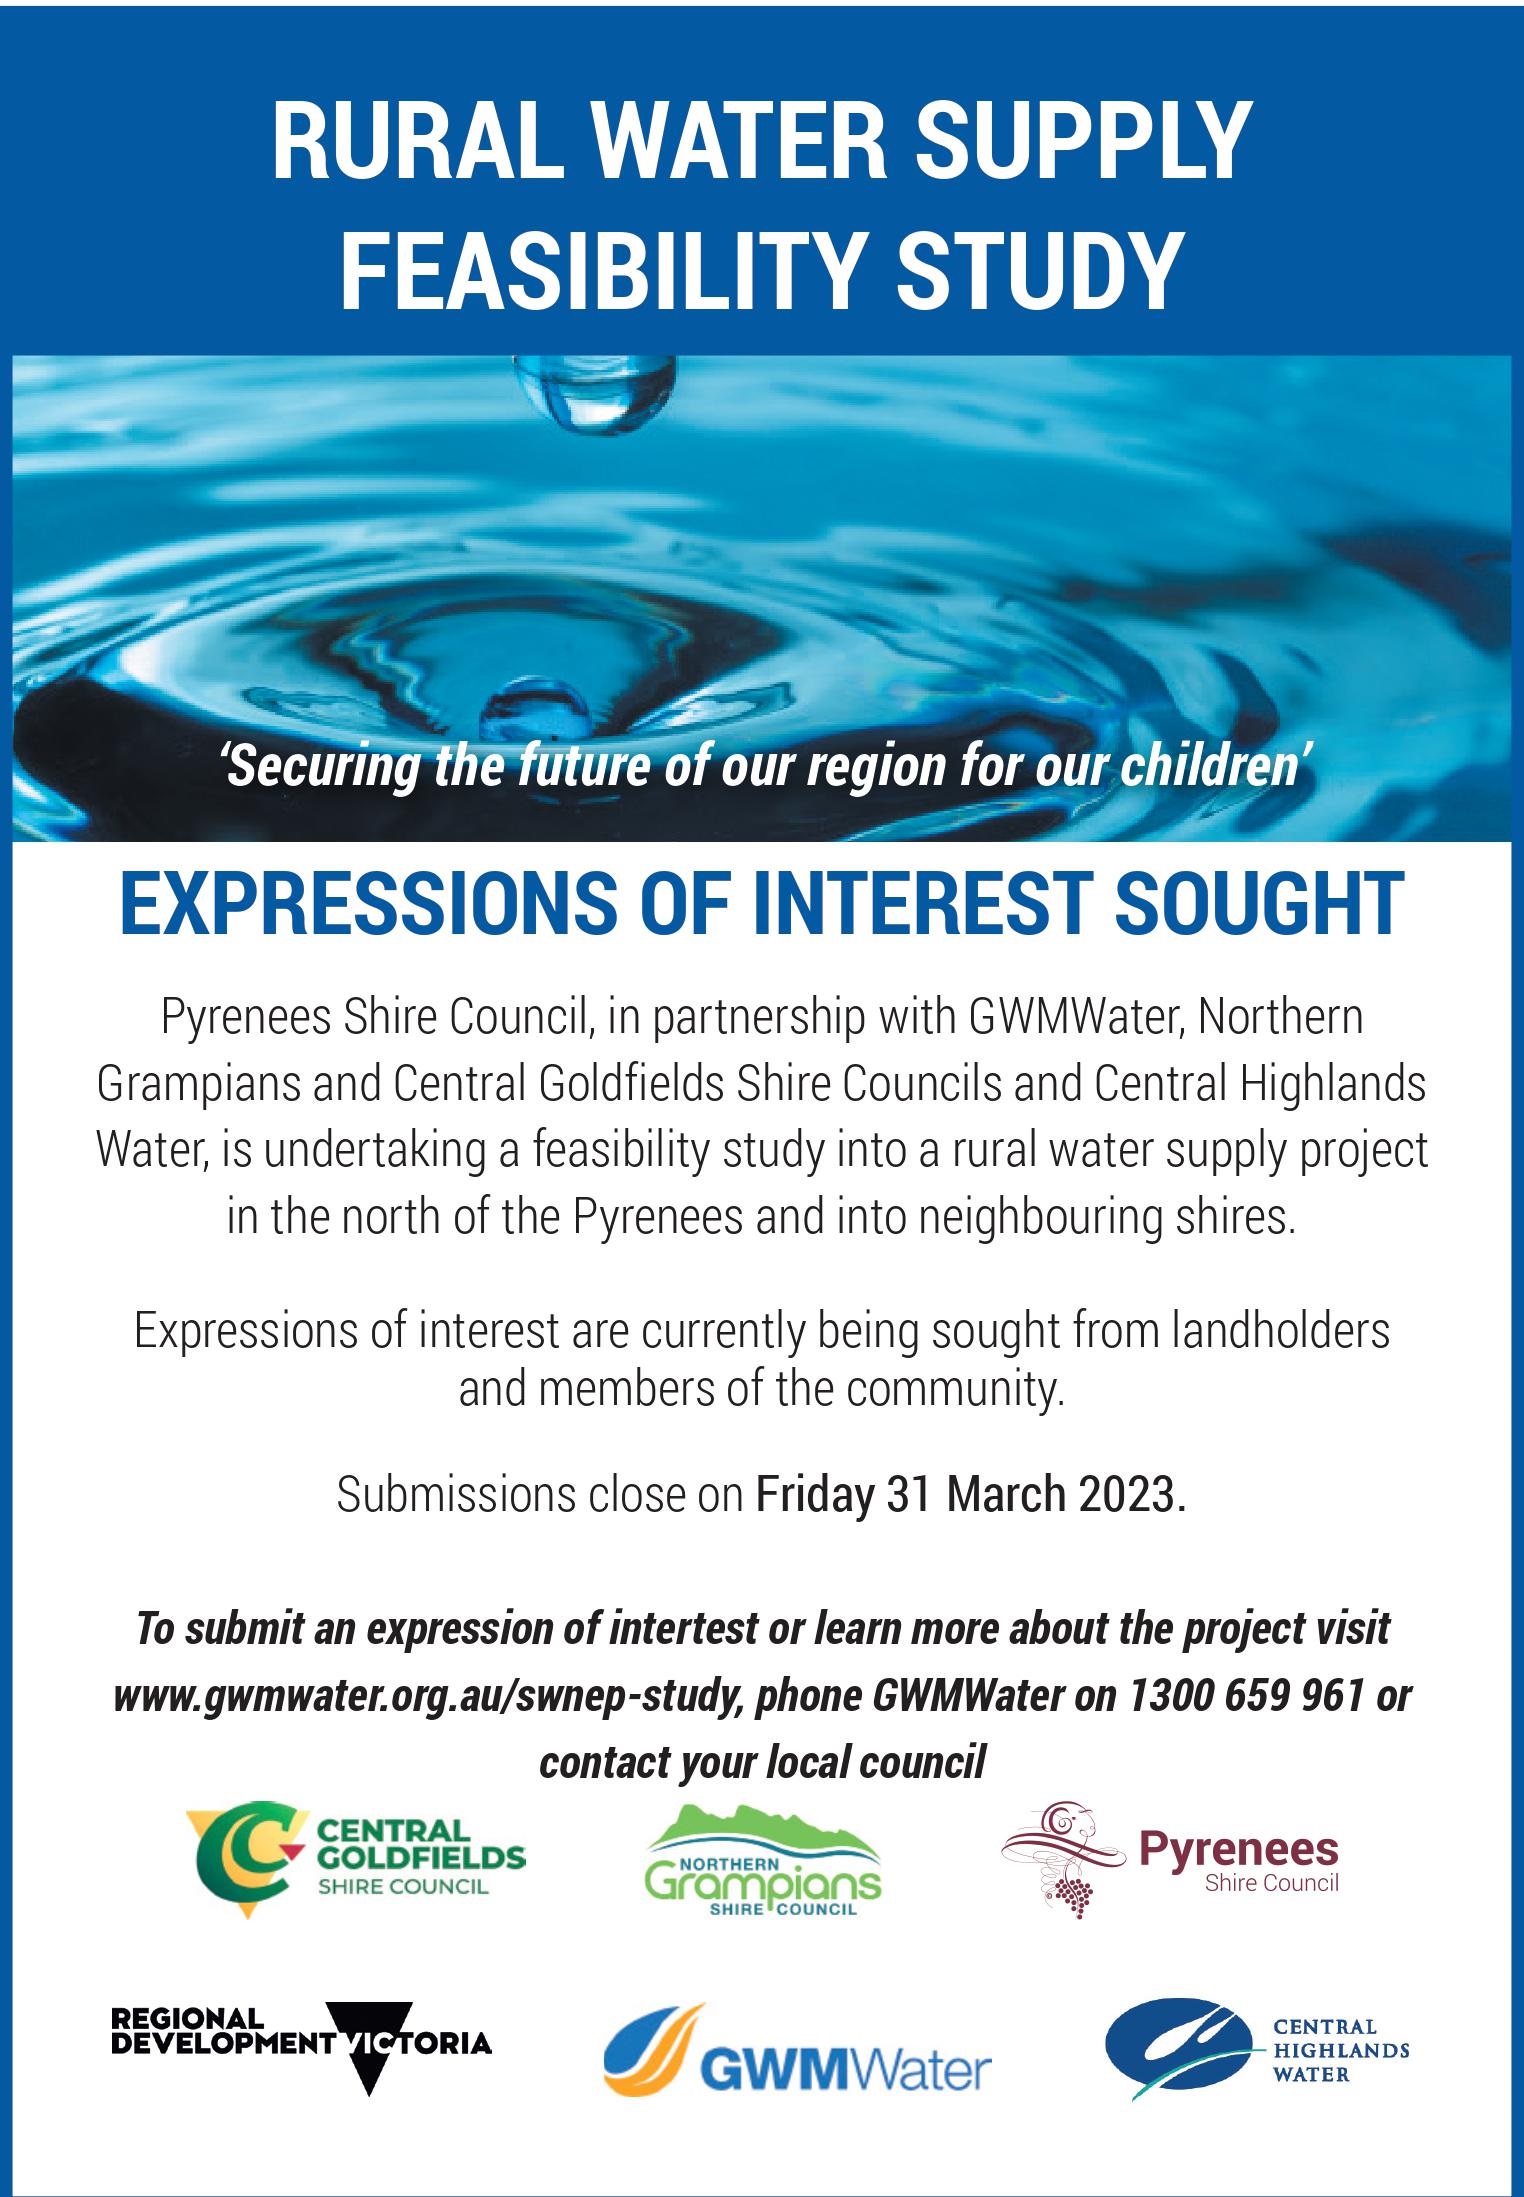 PSC_Rural Water Supply Expressions of Interest Ad 129x186mm_V3 (1) JPEG.jpg